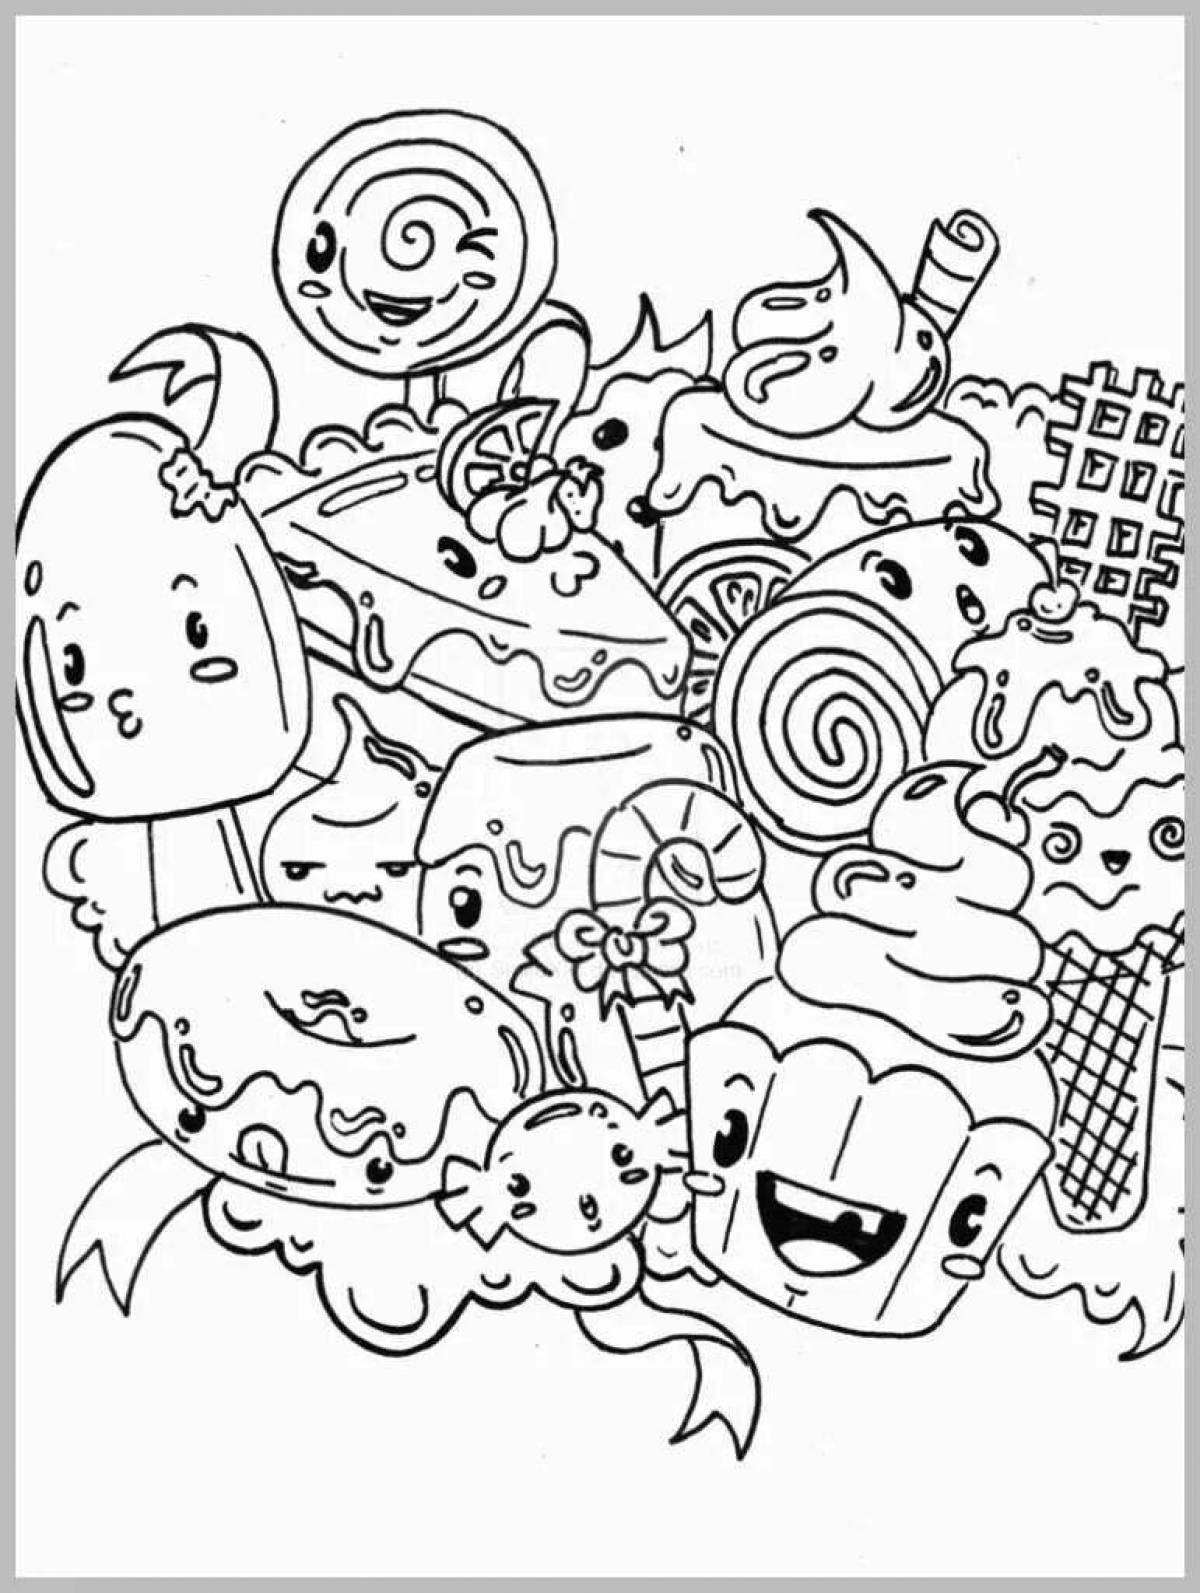 Great candy coloring book for kids